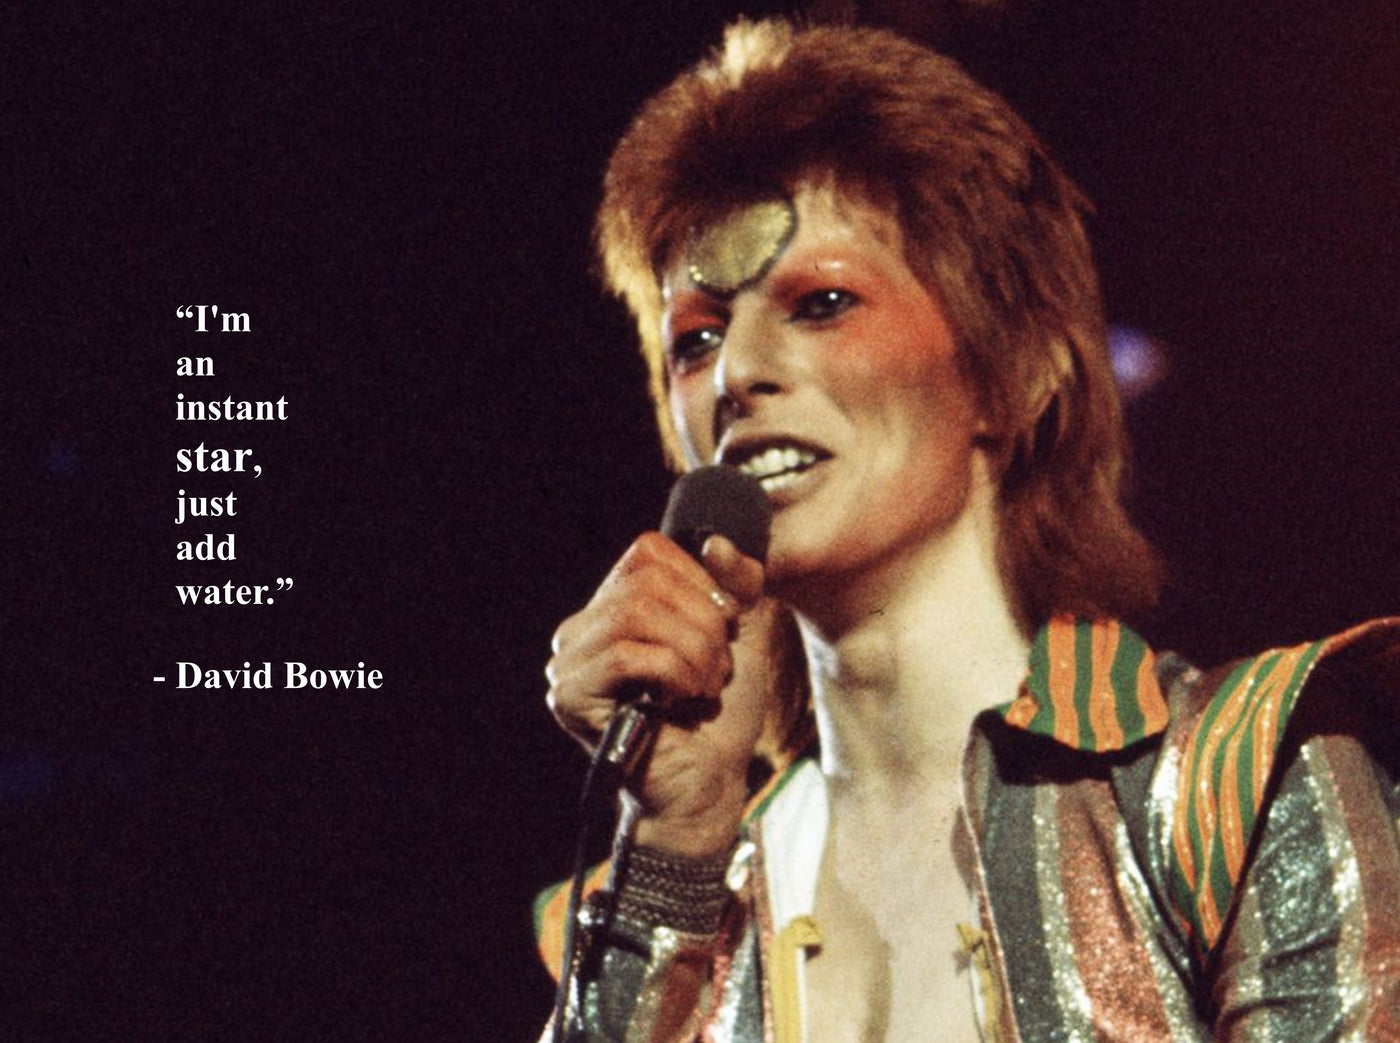 BOWIE QUOTES "I'm an instant star"